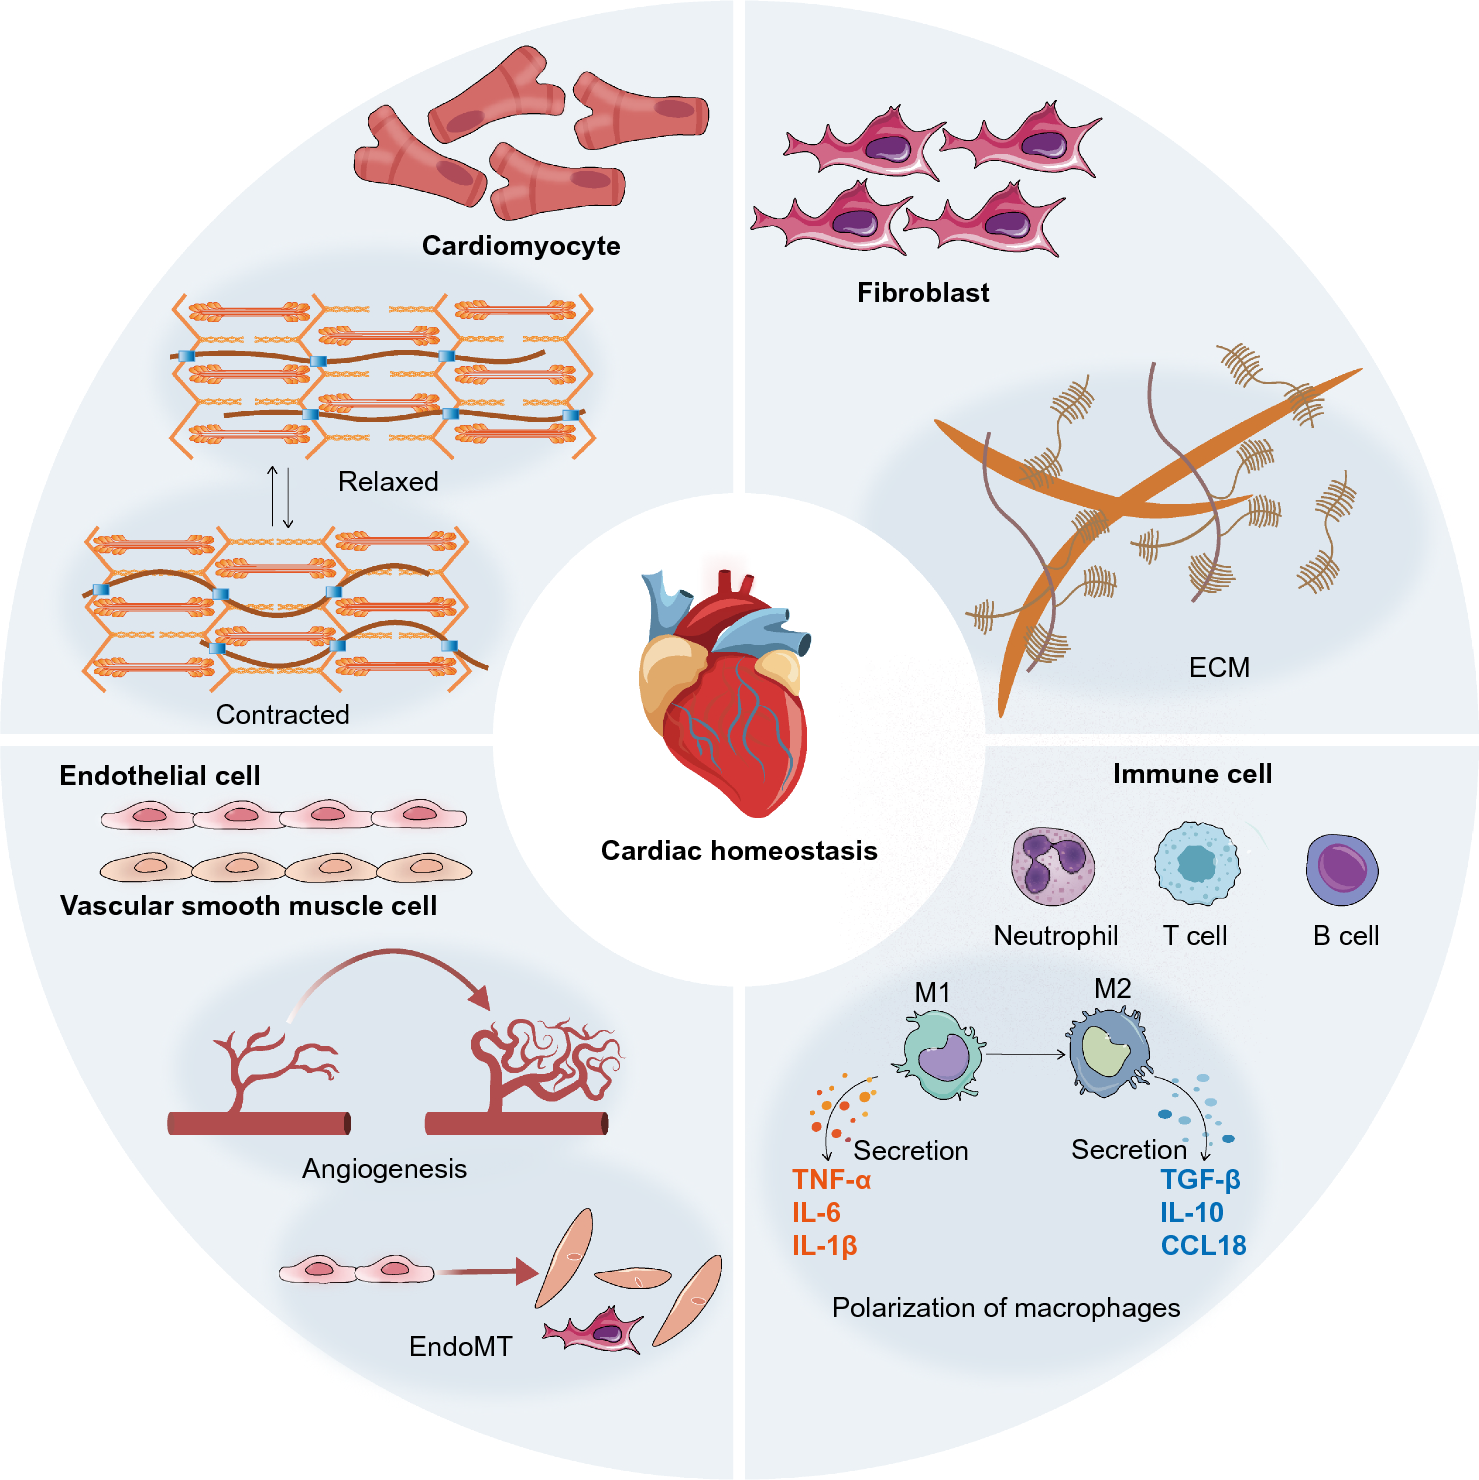 The role of cardiac microenvironment in cardiovascular diseases: implications for therapy